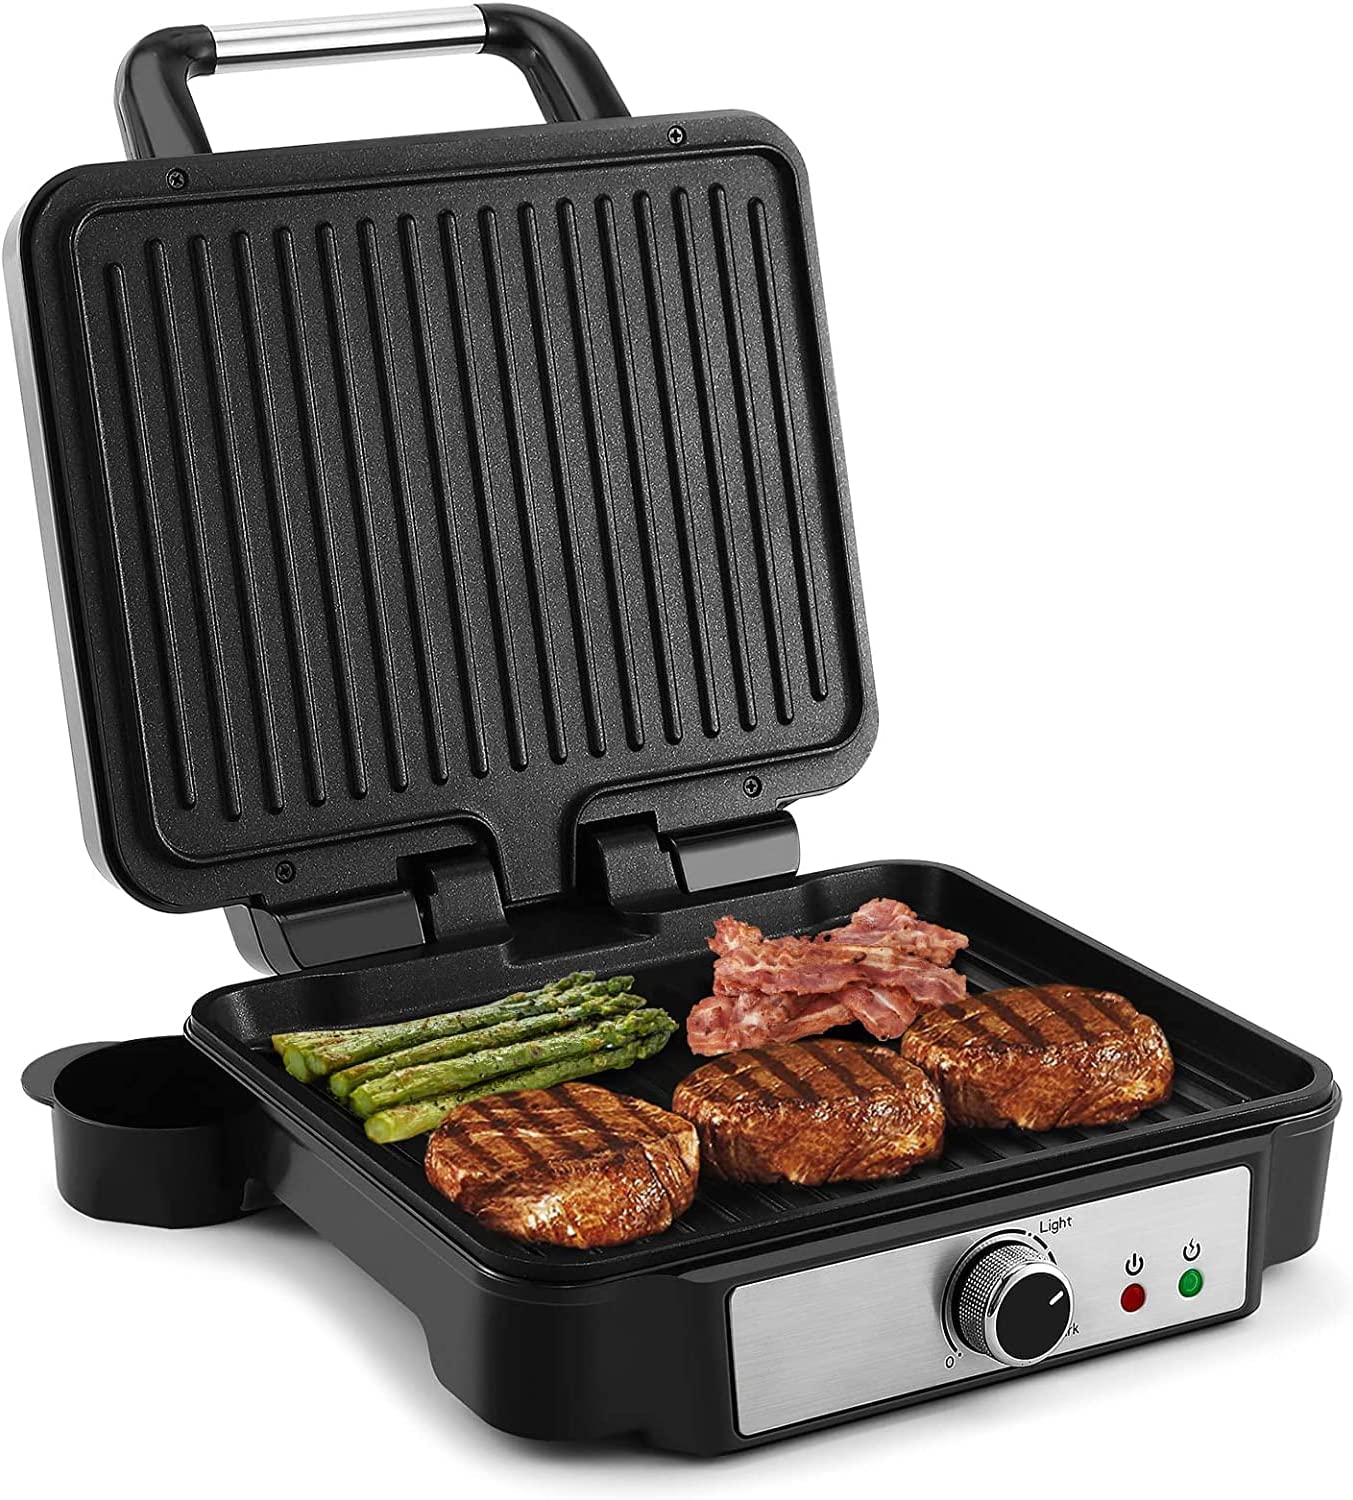 Tiastar Monxook Contact Grill, 180 Degree Opening, 3-in-1 Non-Stick Panini Electric Grill, Contact Sandwich Grill, 1800 W Sandwich Toaster with Removable Drip Tray, Adjustable Temperature, Stainless Steel